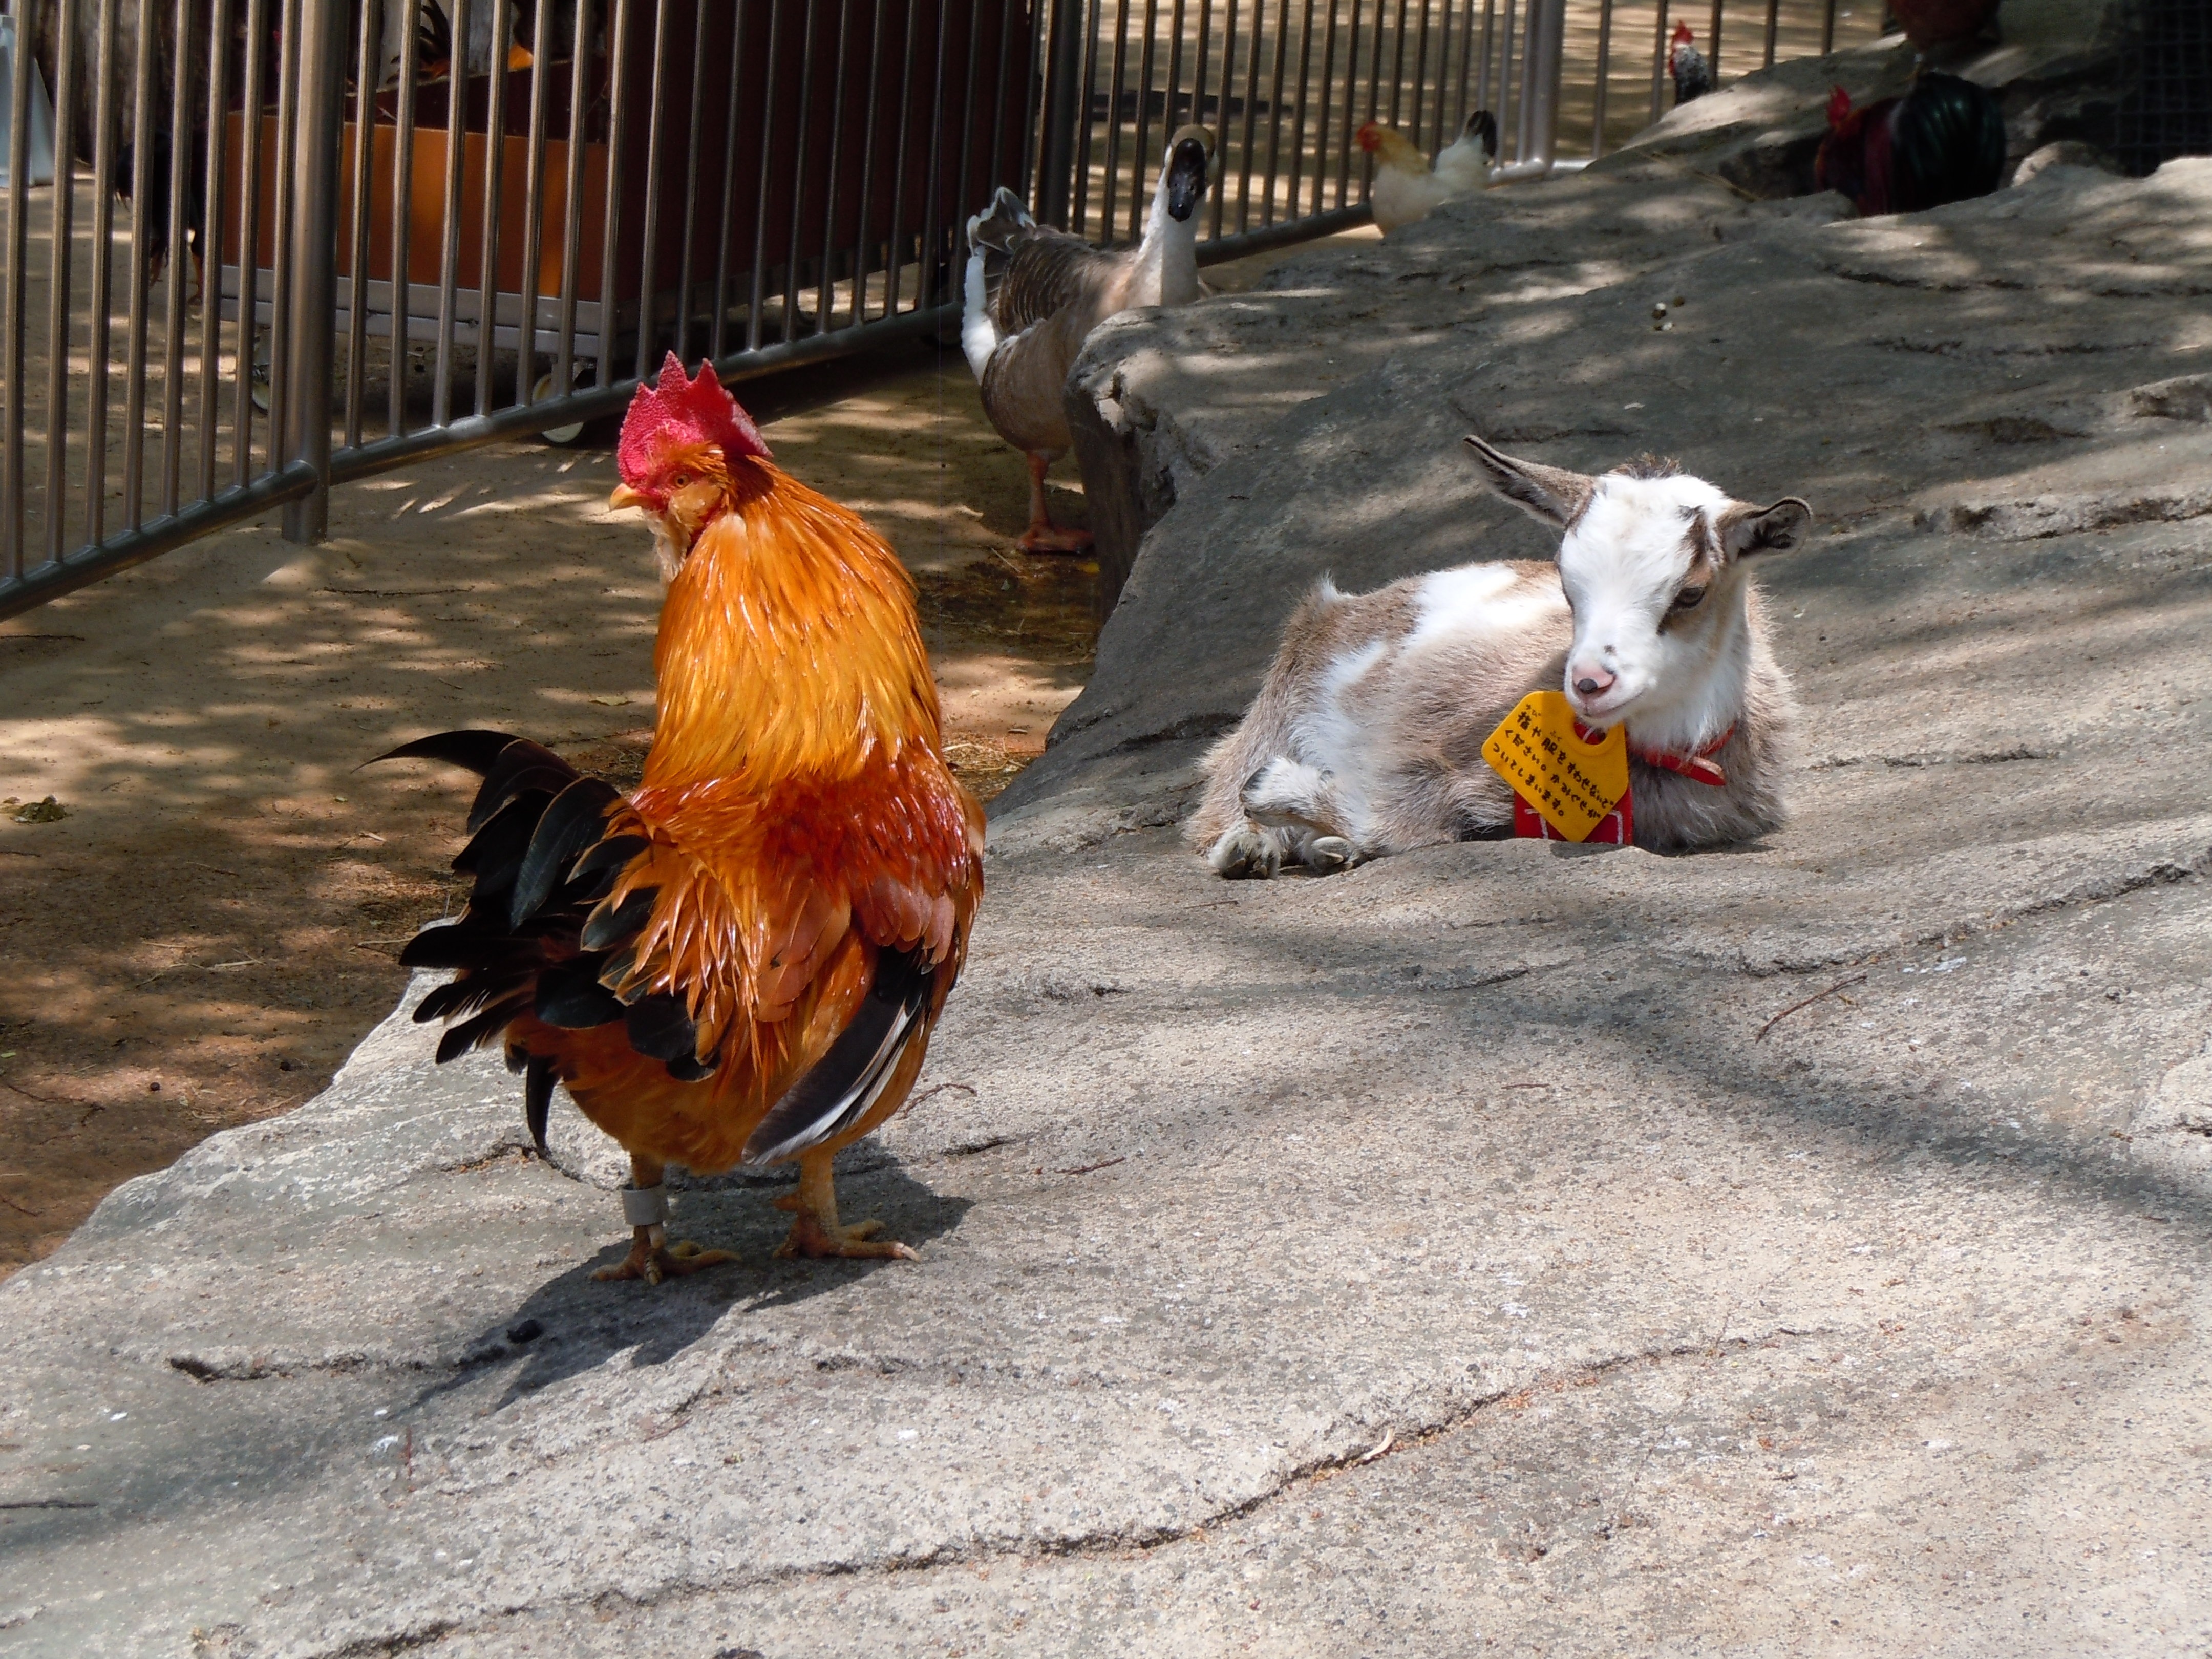 orange rooster and grey and white goat kid